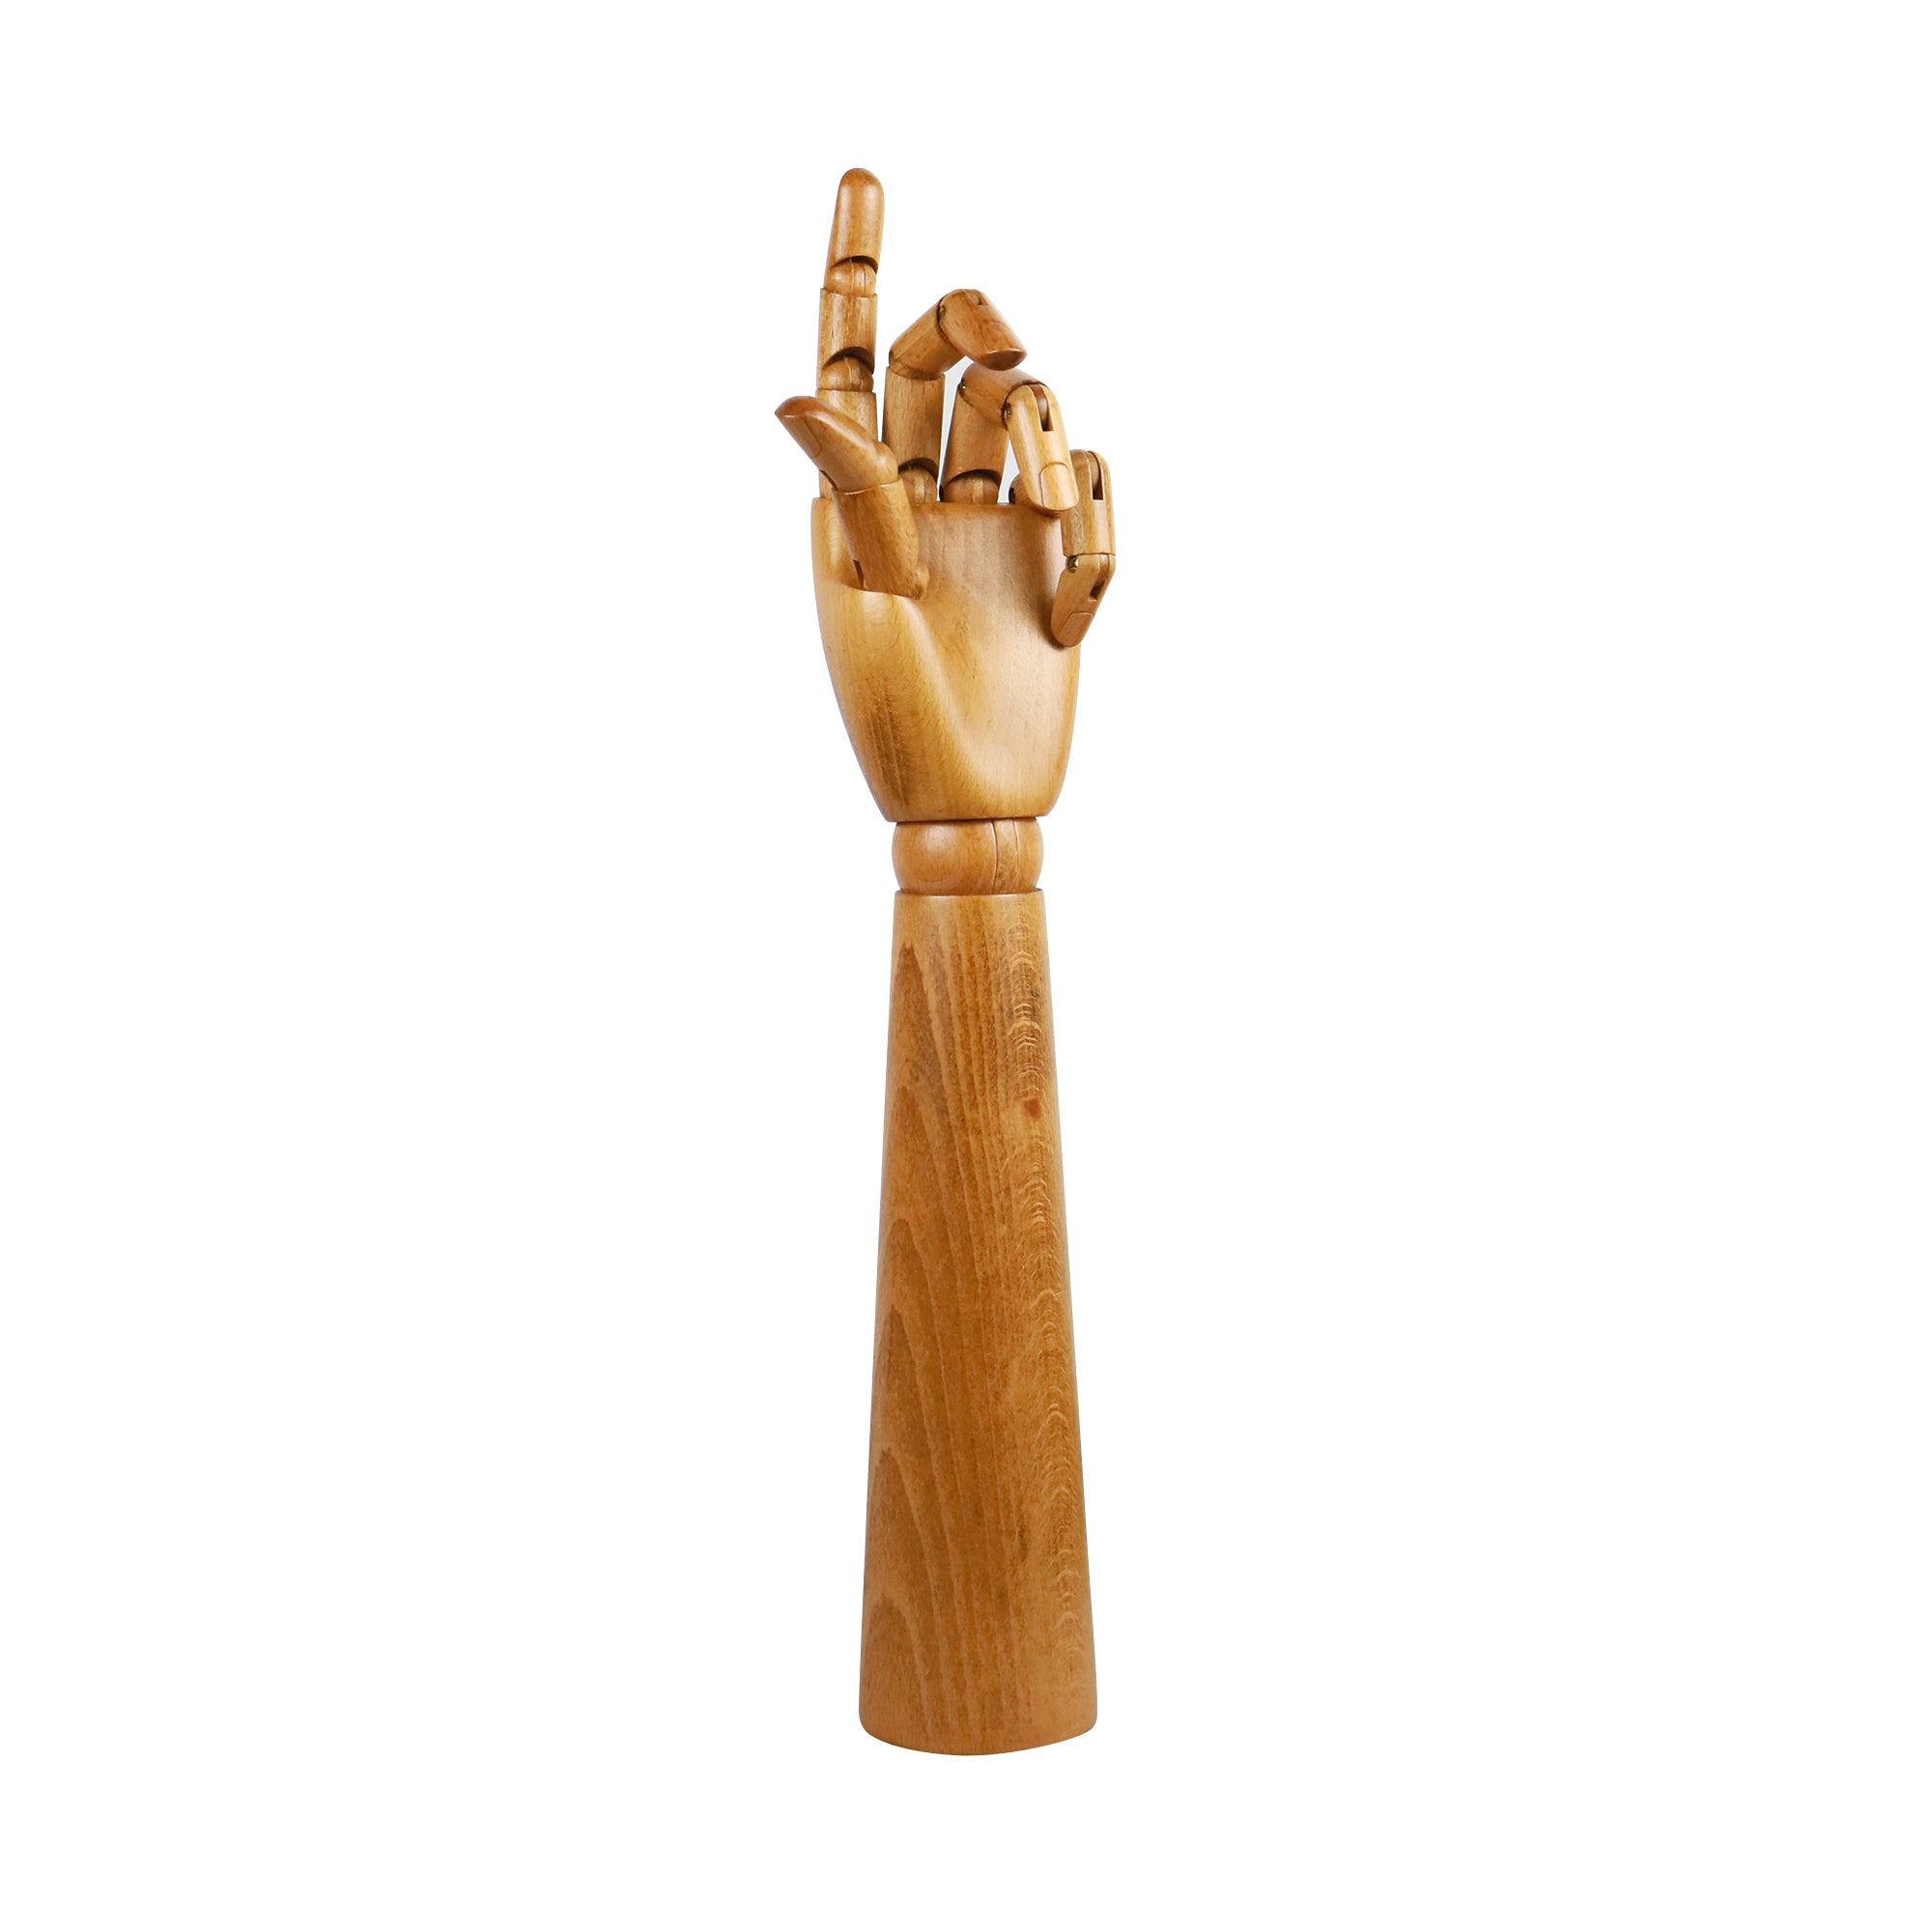 Left and Right Wooden Mannequin Hands for Nails Flexible Movable Fingers  Manikin Arms,Jewelry Display Props Artist Model Hand mannequin